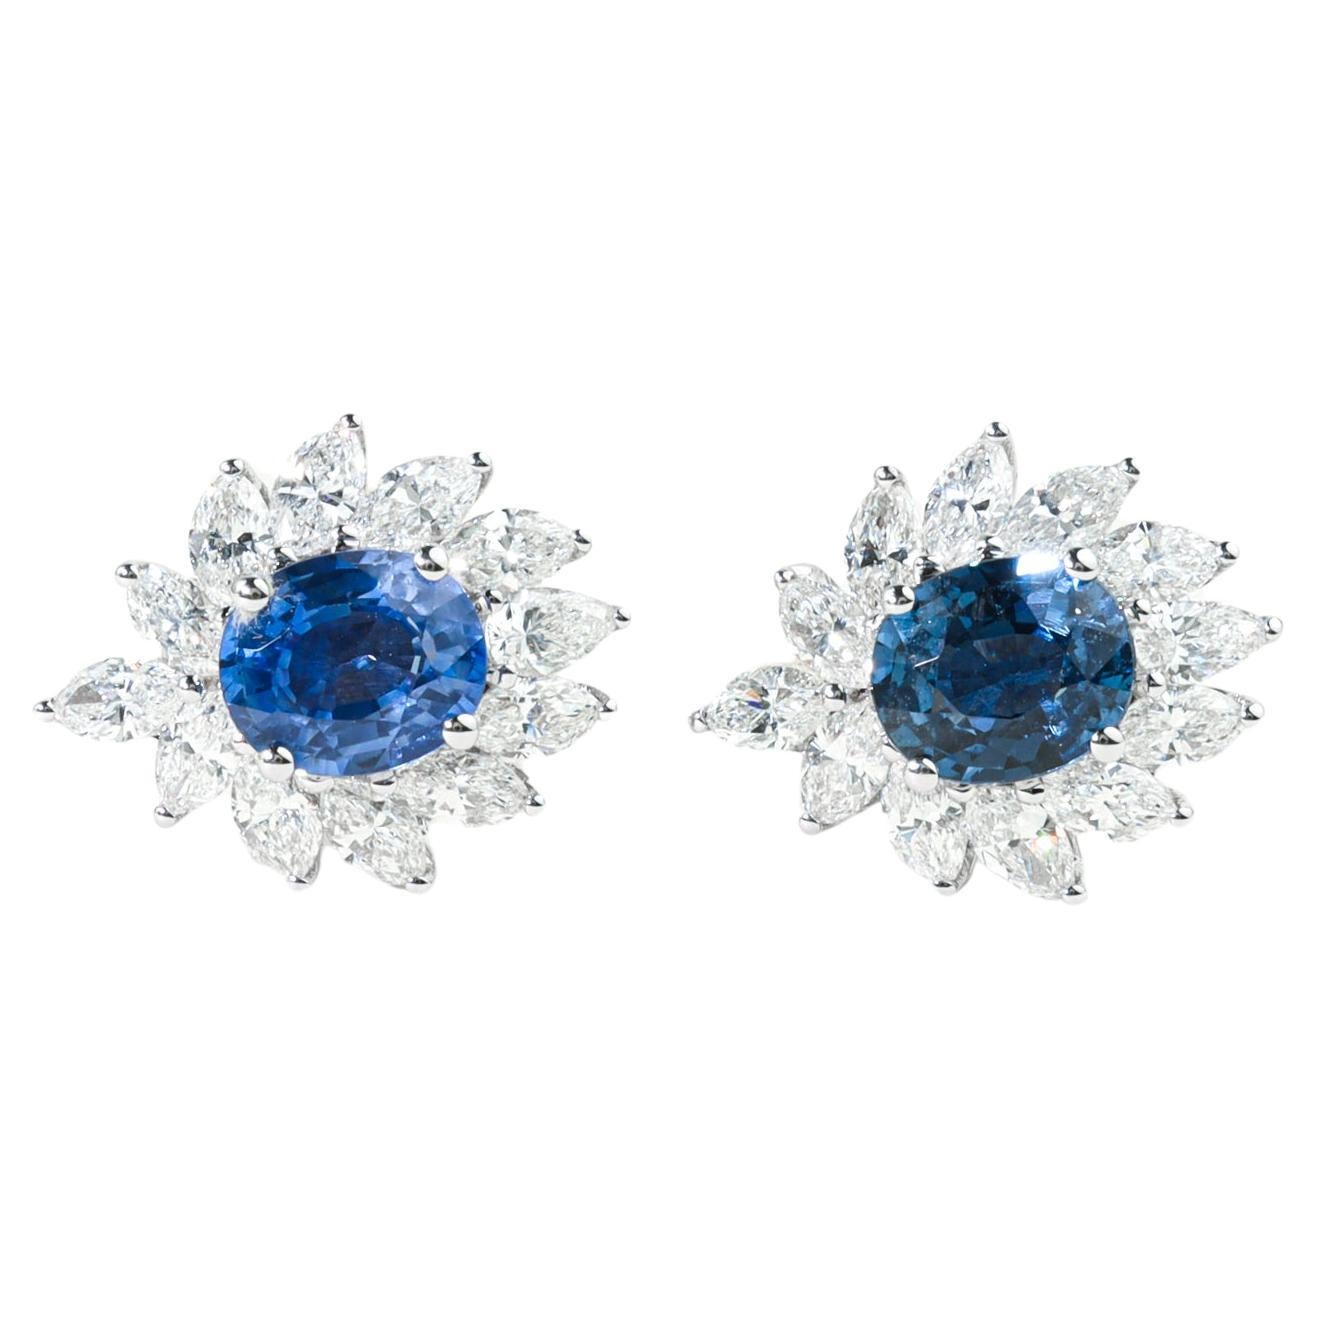 Certified Sapphire Diamond Halo Oval Cut Stud Earrings for her, 18k white gold For Sale